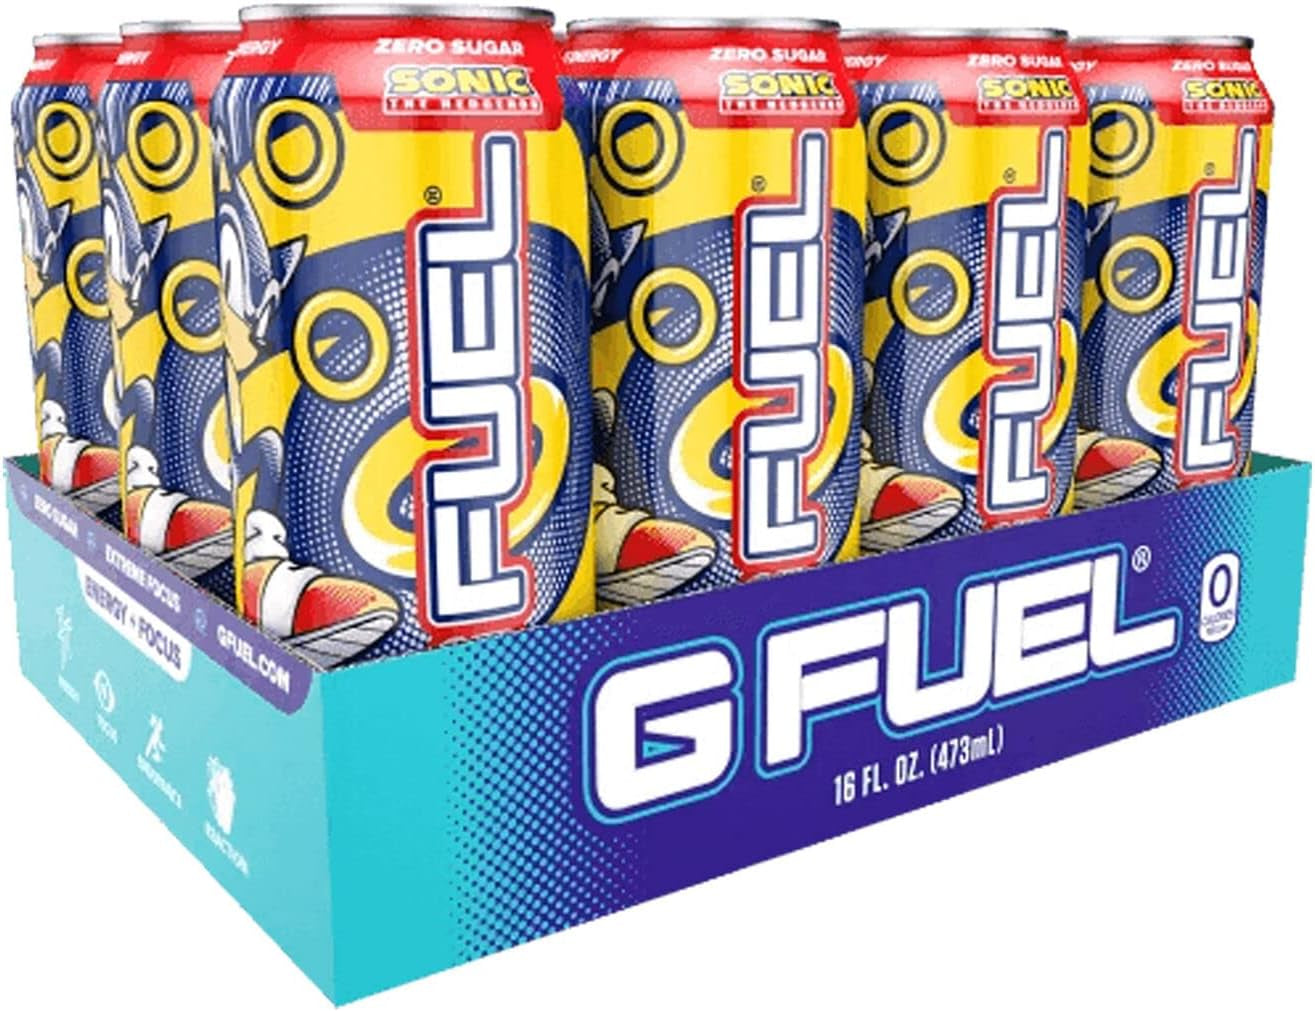 G Fuel Sonic Energy Drink, Sugar Free, Healthy Drinks, Zero Calorie, 300 Mg Caffeine per Carbonated Can, Peach Ring Candy Flavor, Focus Amino, Vitamin + Antioxidants Blend - 12 Pack